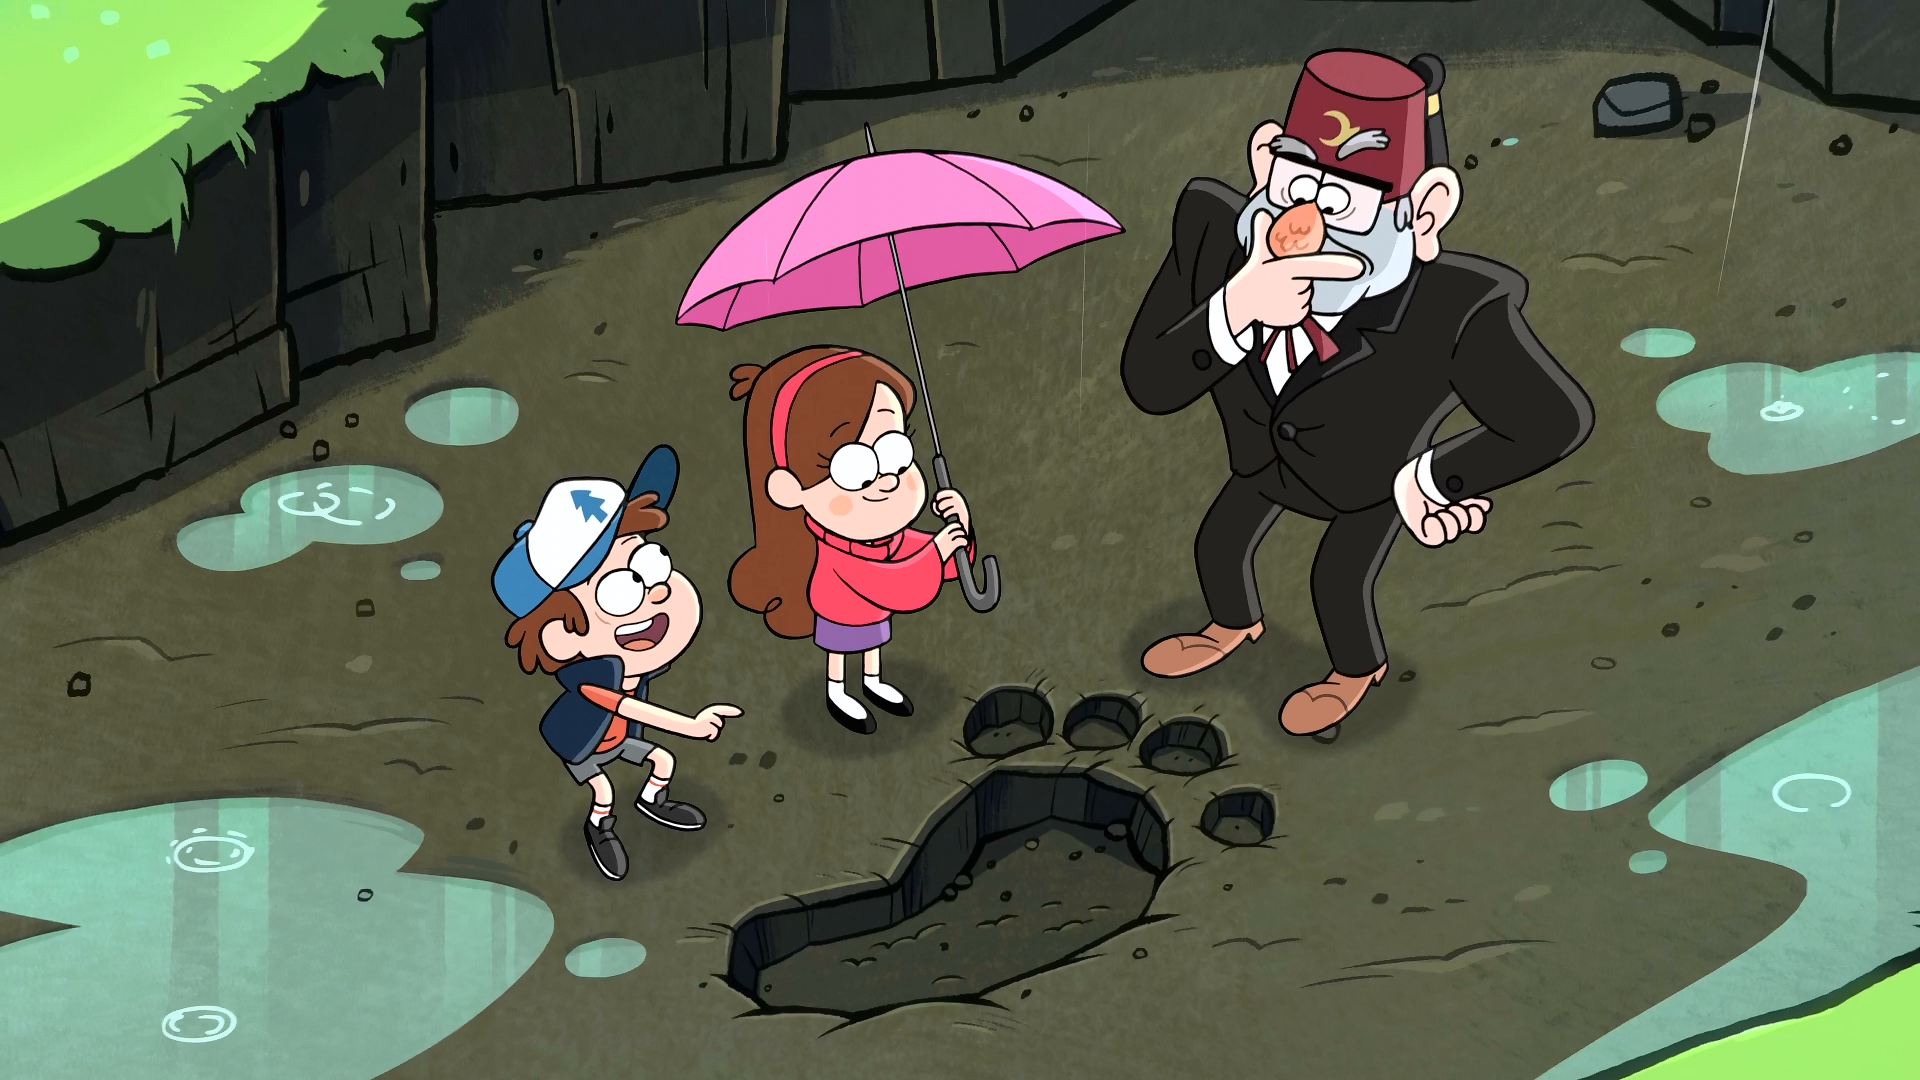 Disney Channel Presents Gravity Falls OT Awesome new animated show